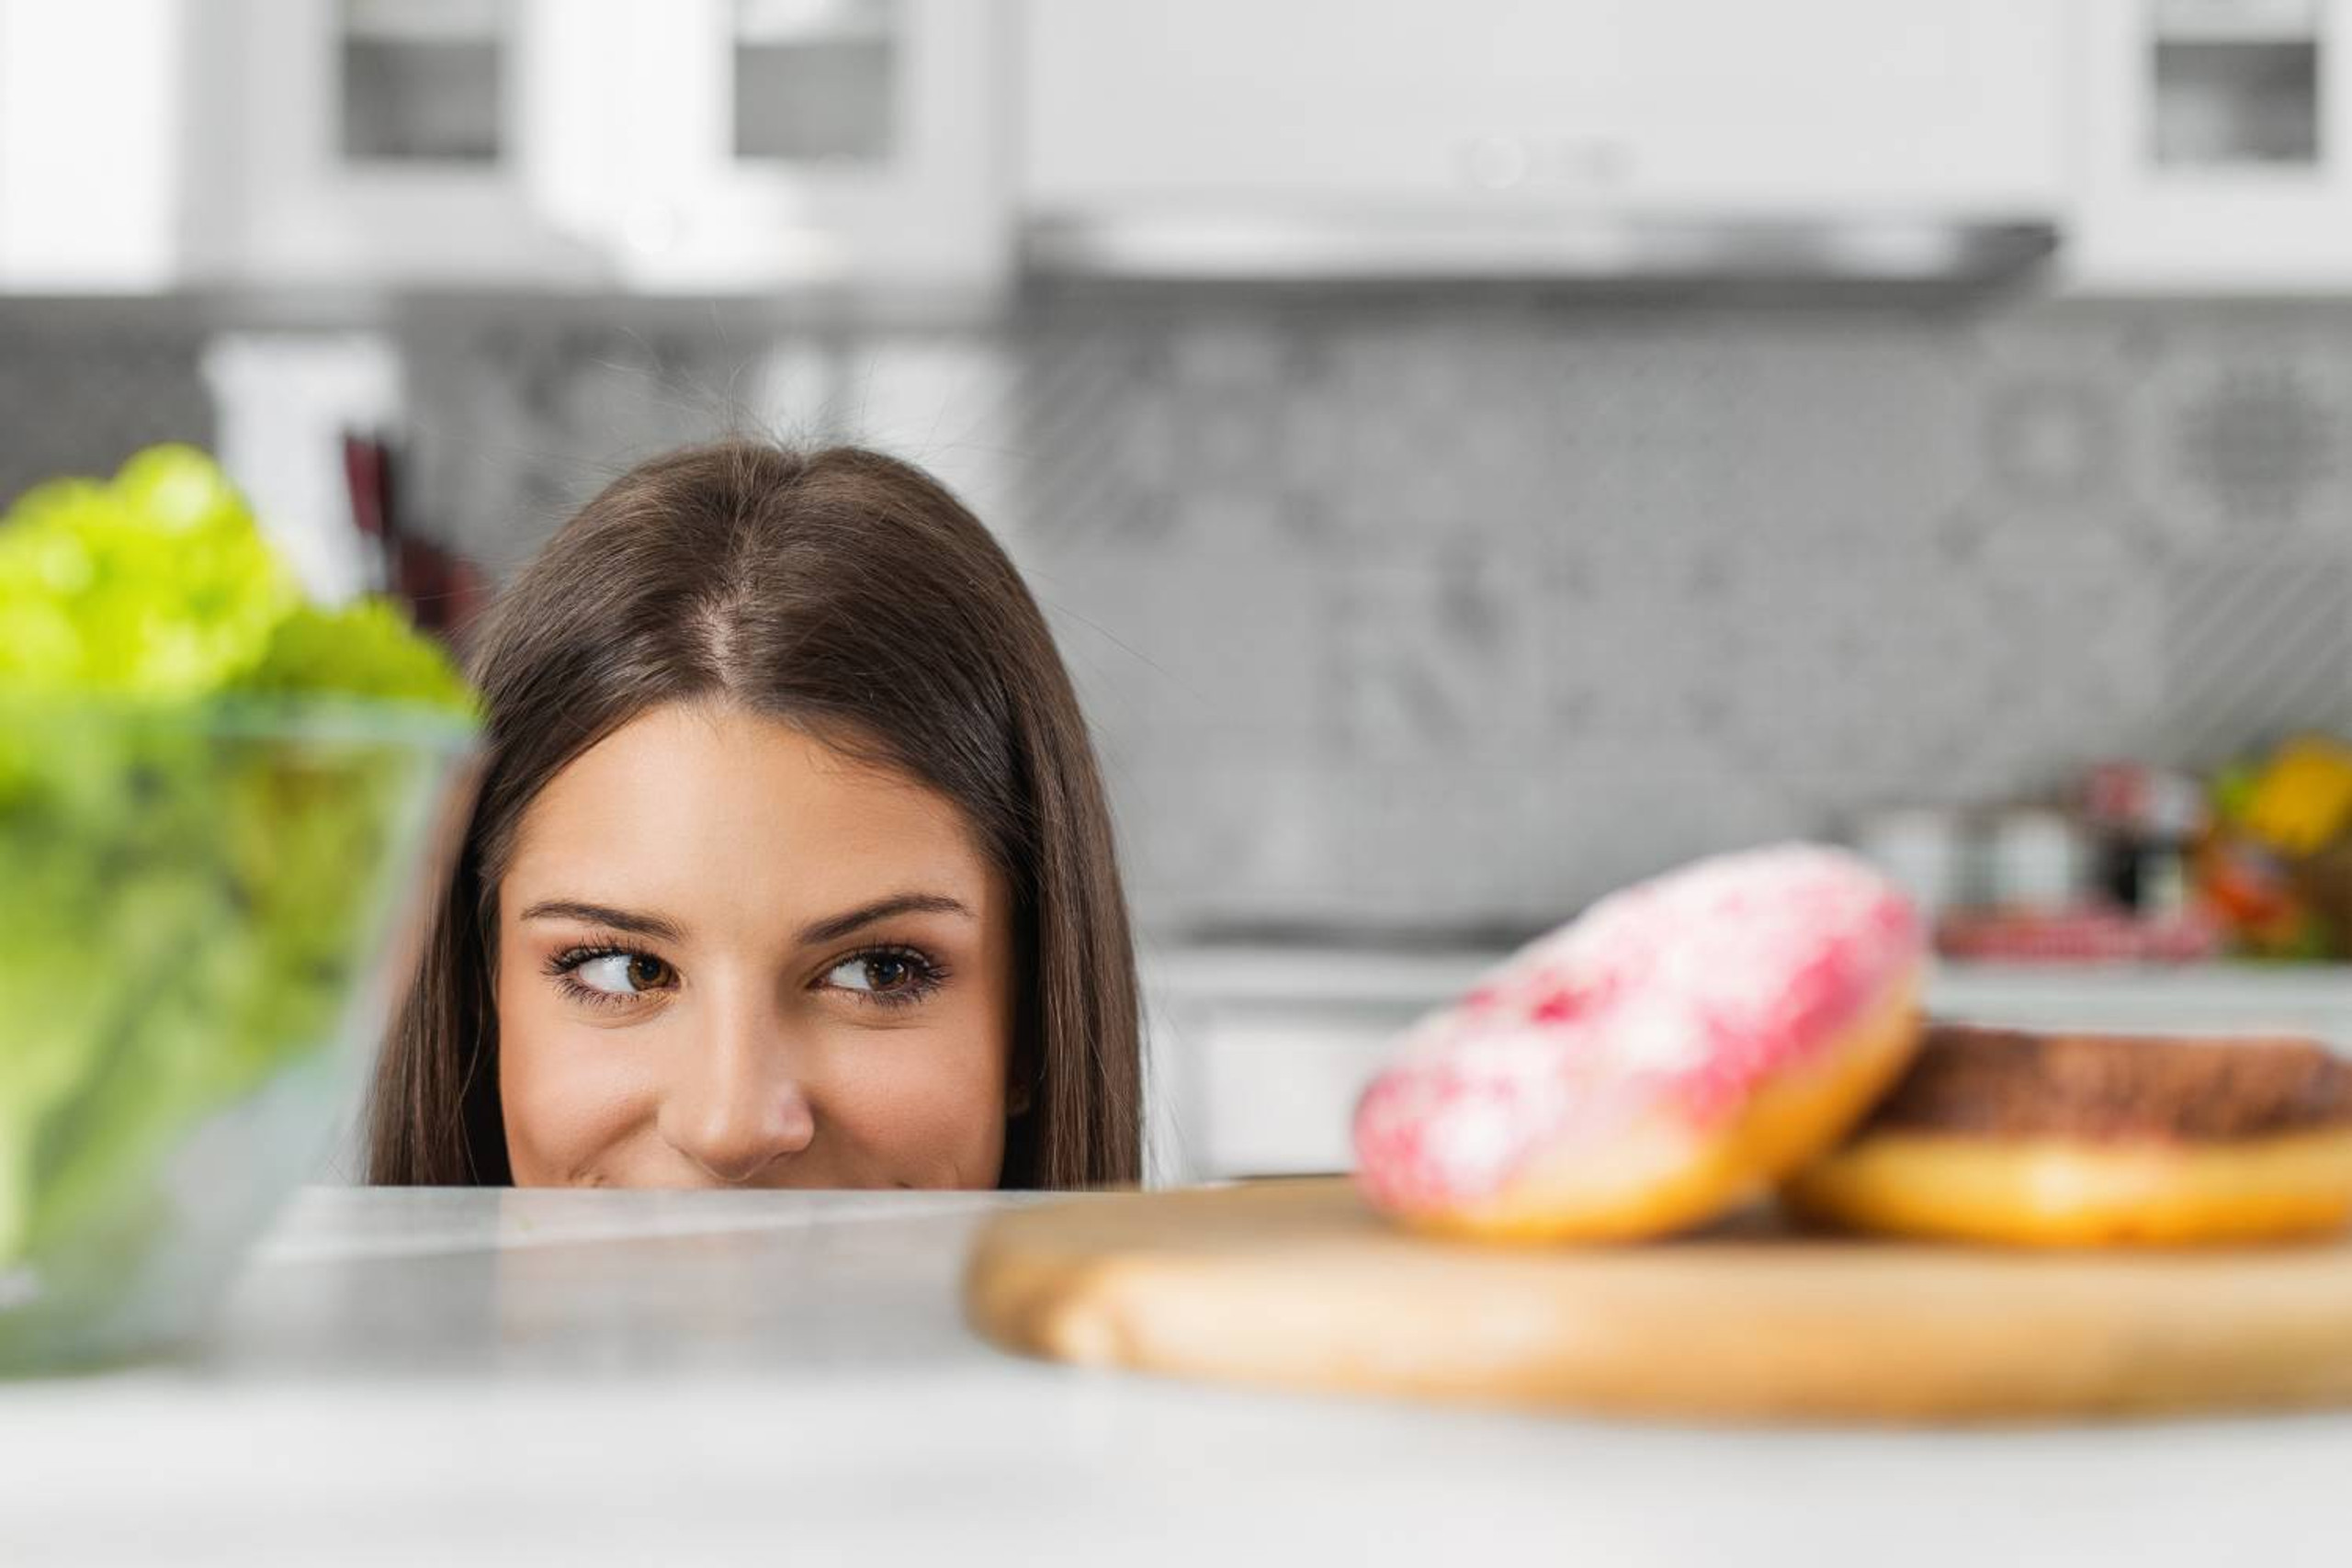 How To Stop Craving Sugar & Get Back on Track